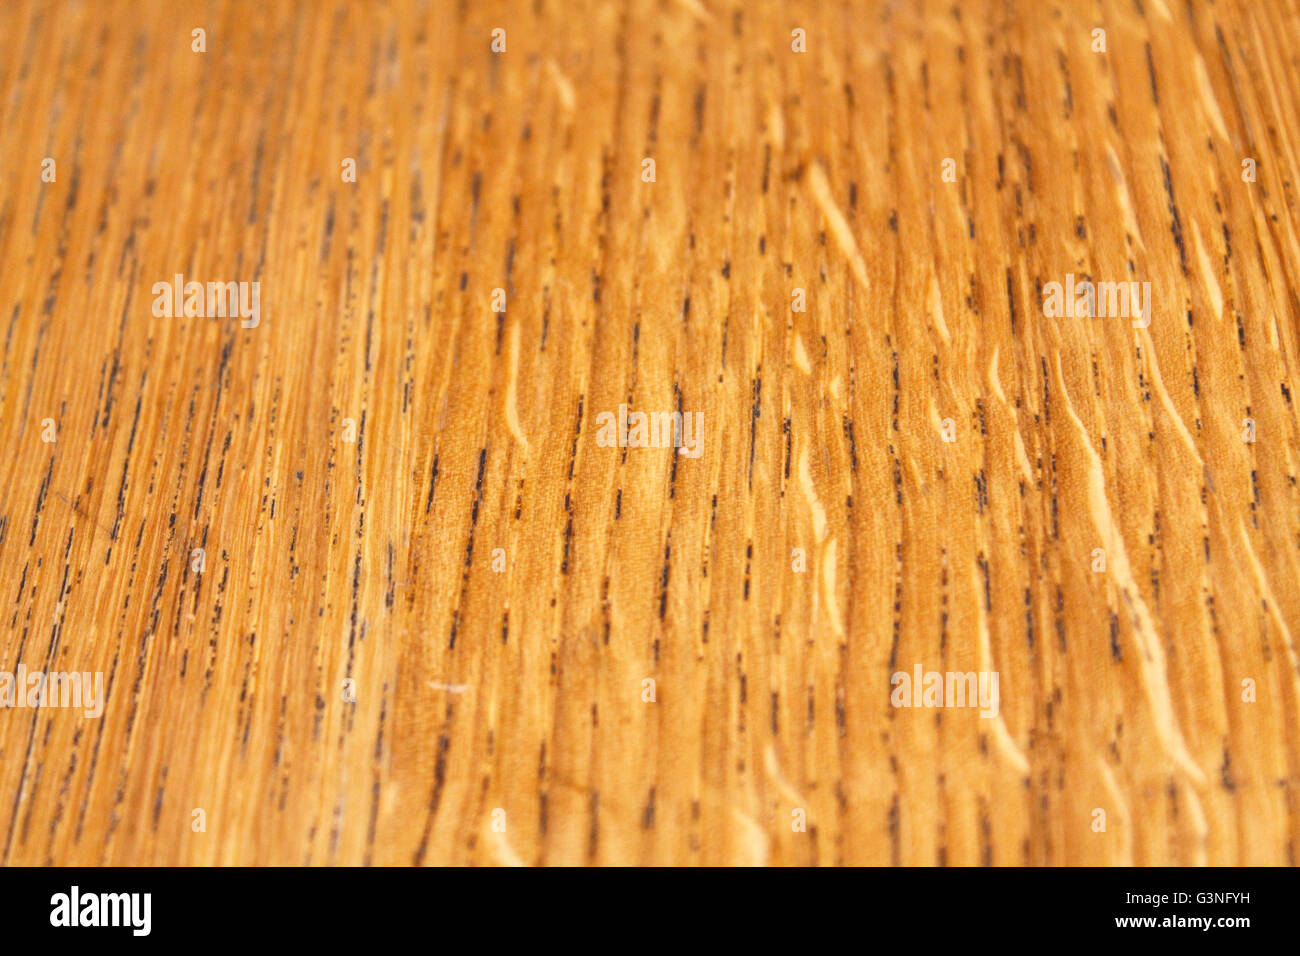 Wooden Floor With Scratch Marks After Dog Claws Stock Photo